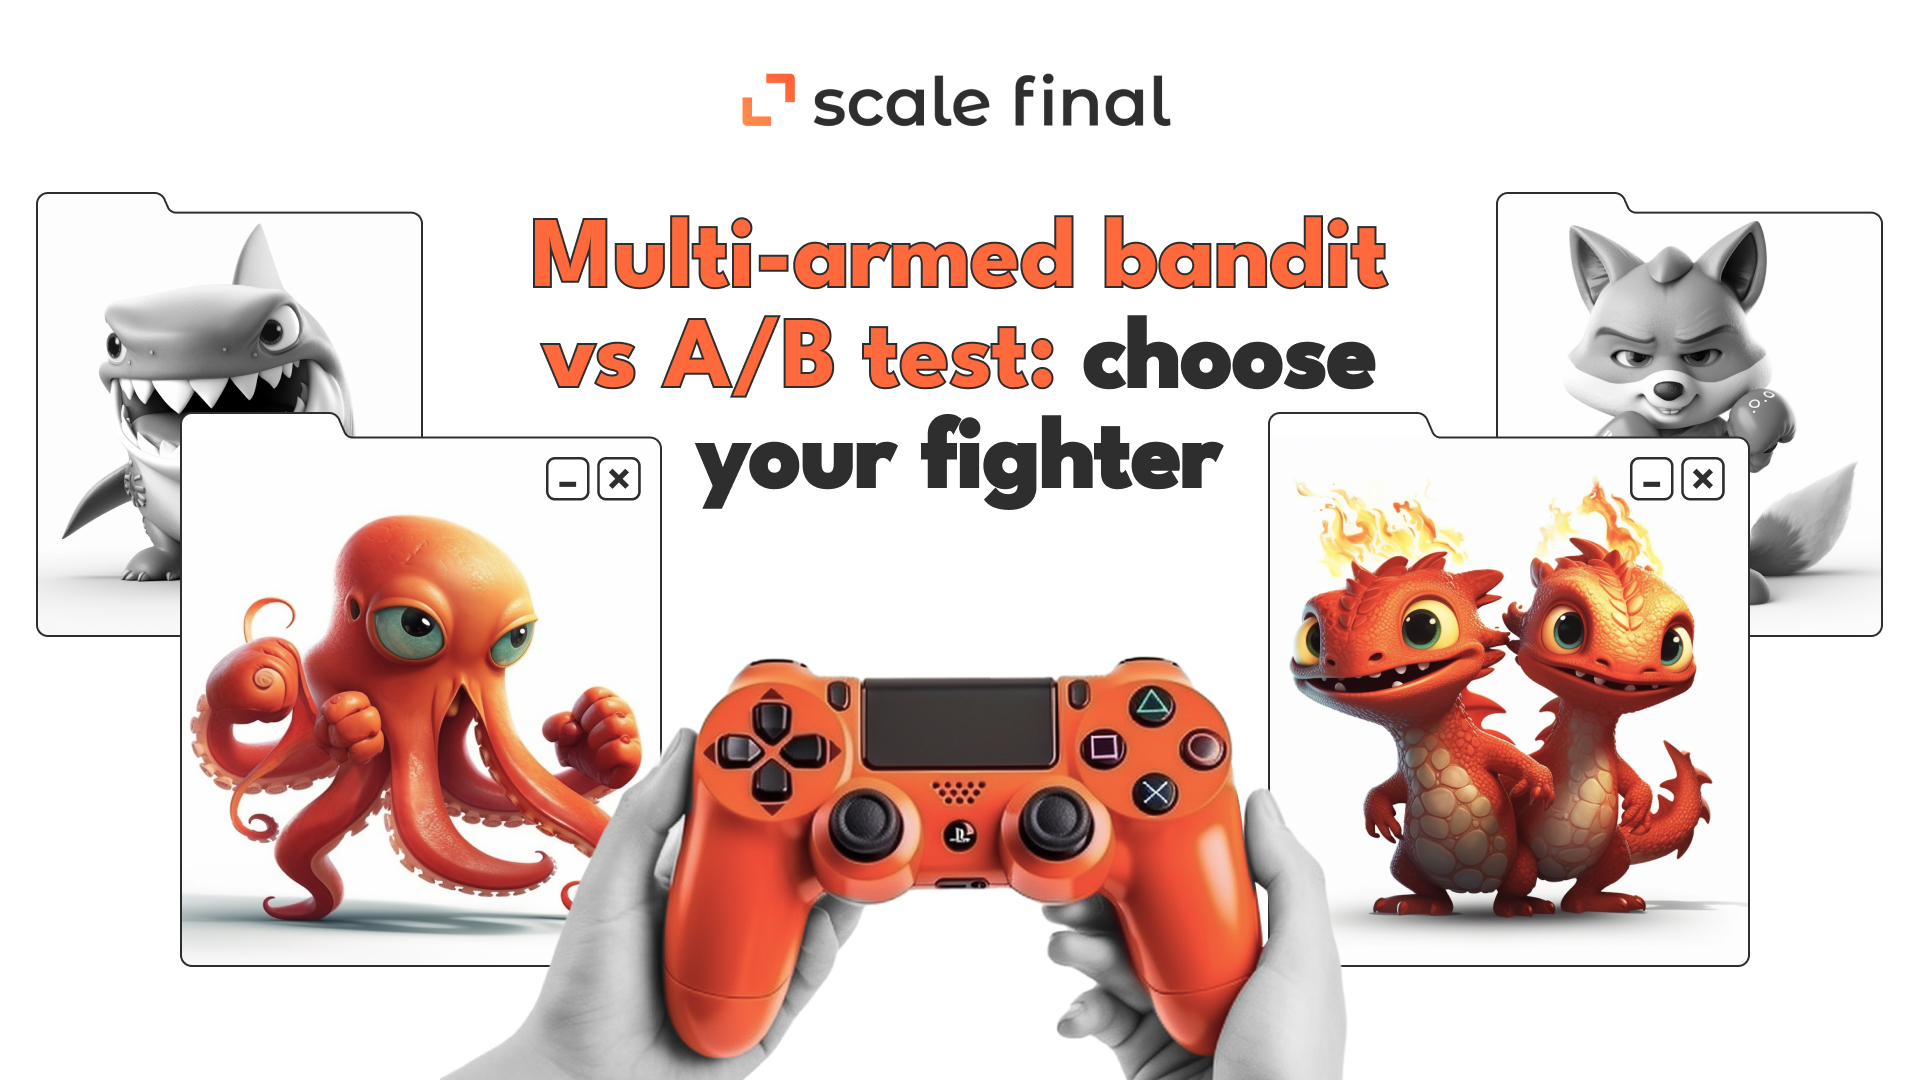 Multi-armed bandit vs A/B test: choose your fighter